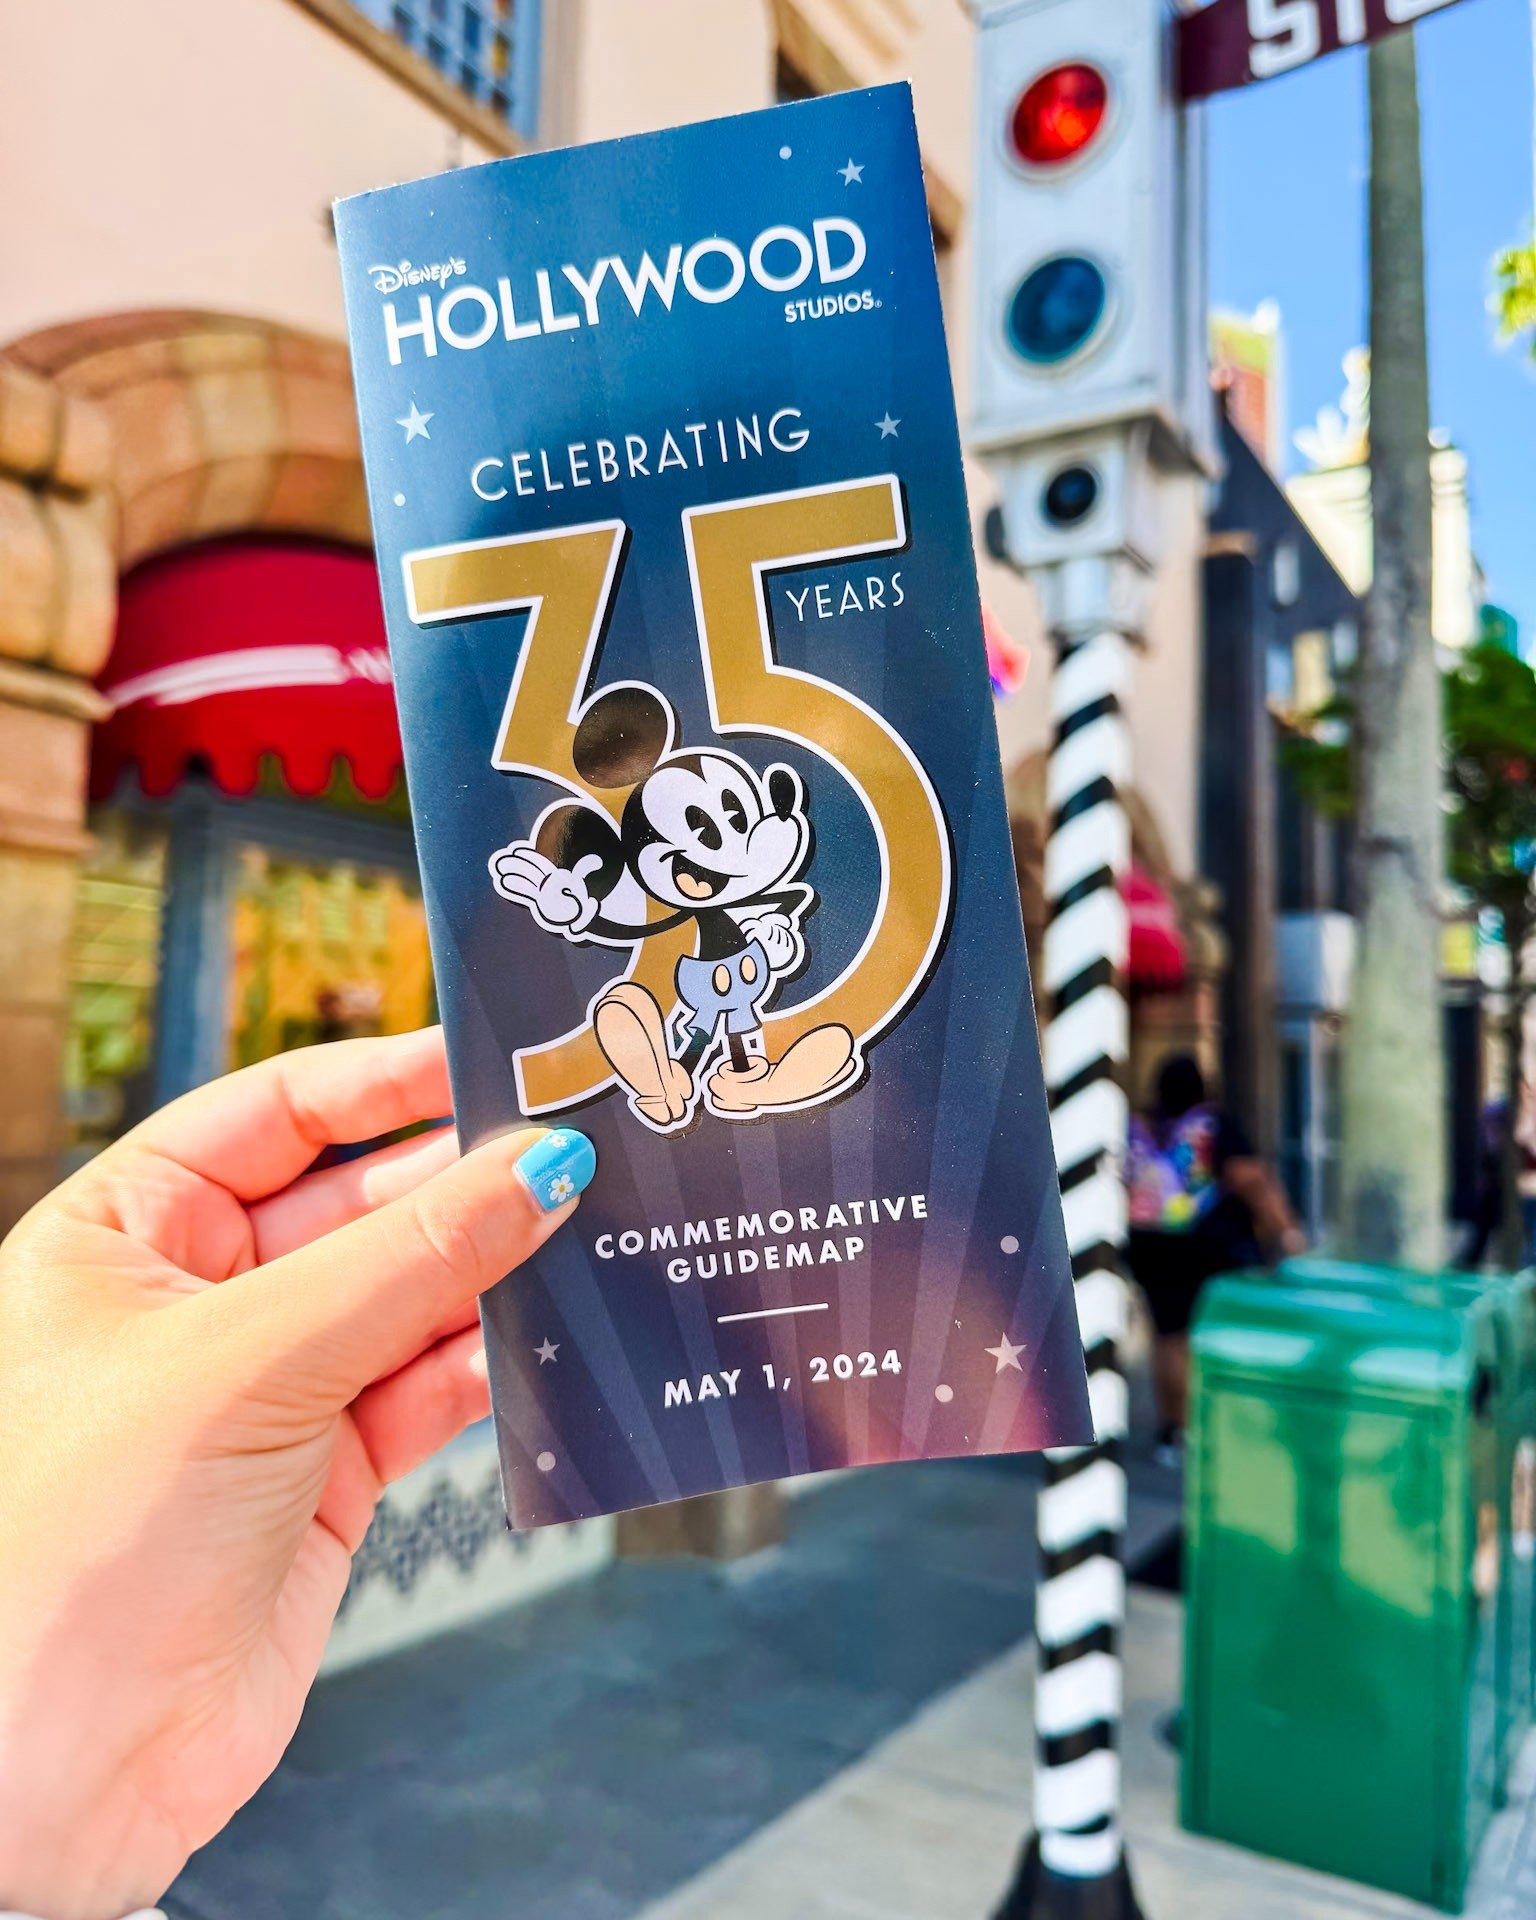 I won't lie... It was a little bit of a hot mess that was giving Jollywood vibes, but there were still some great moments that I was able to capture and share to celebrate Disney's Hollywood Studios 35th Anniversary with you! I'm celebrating with a s